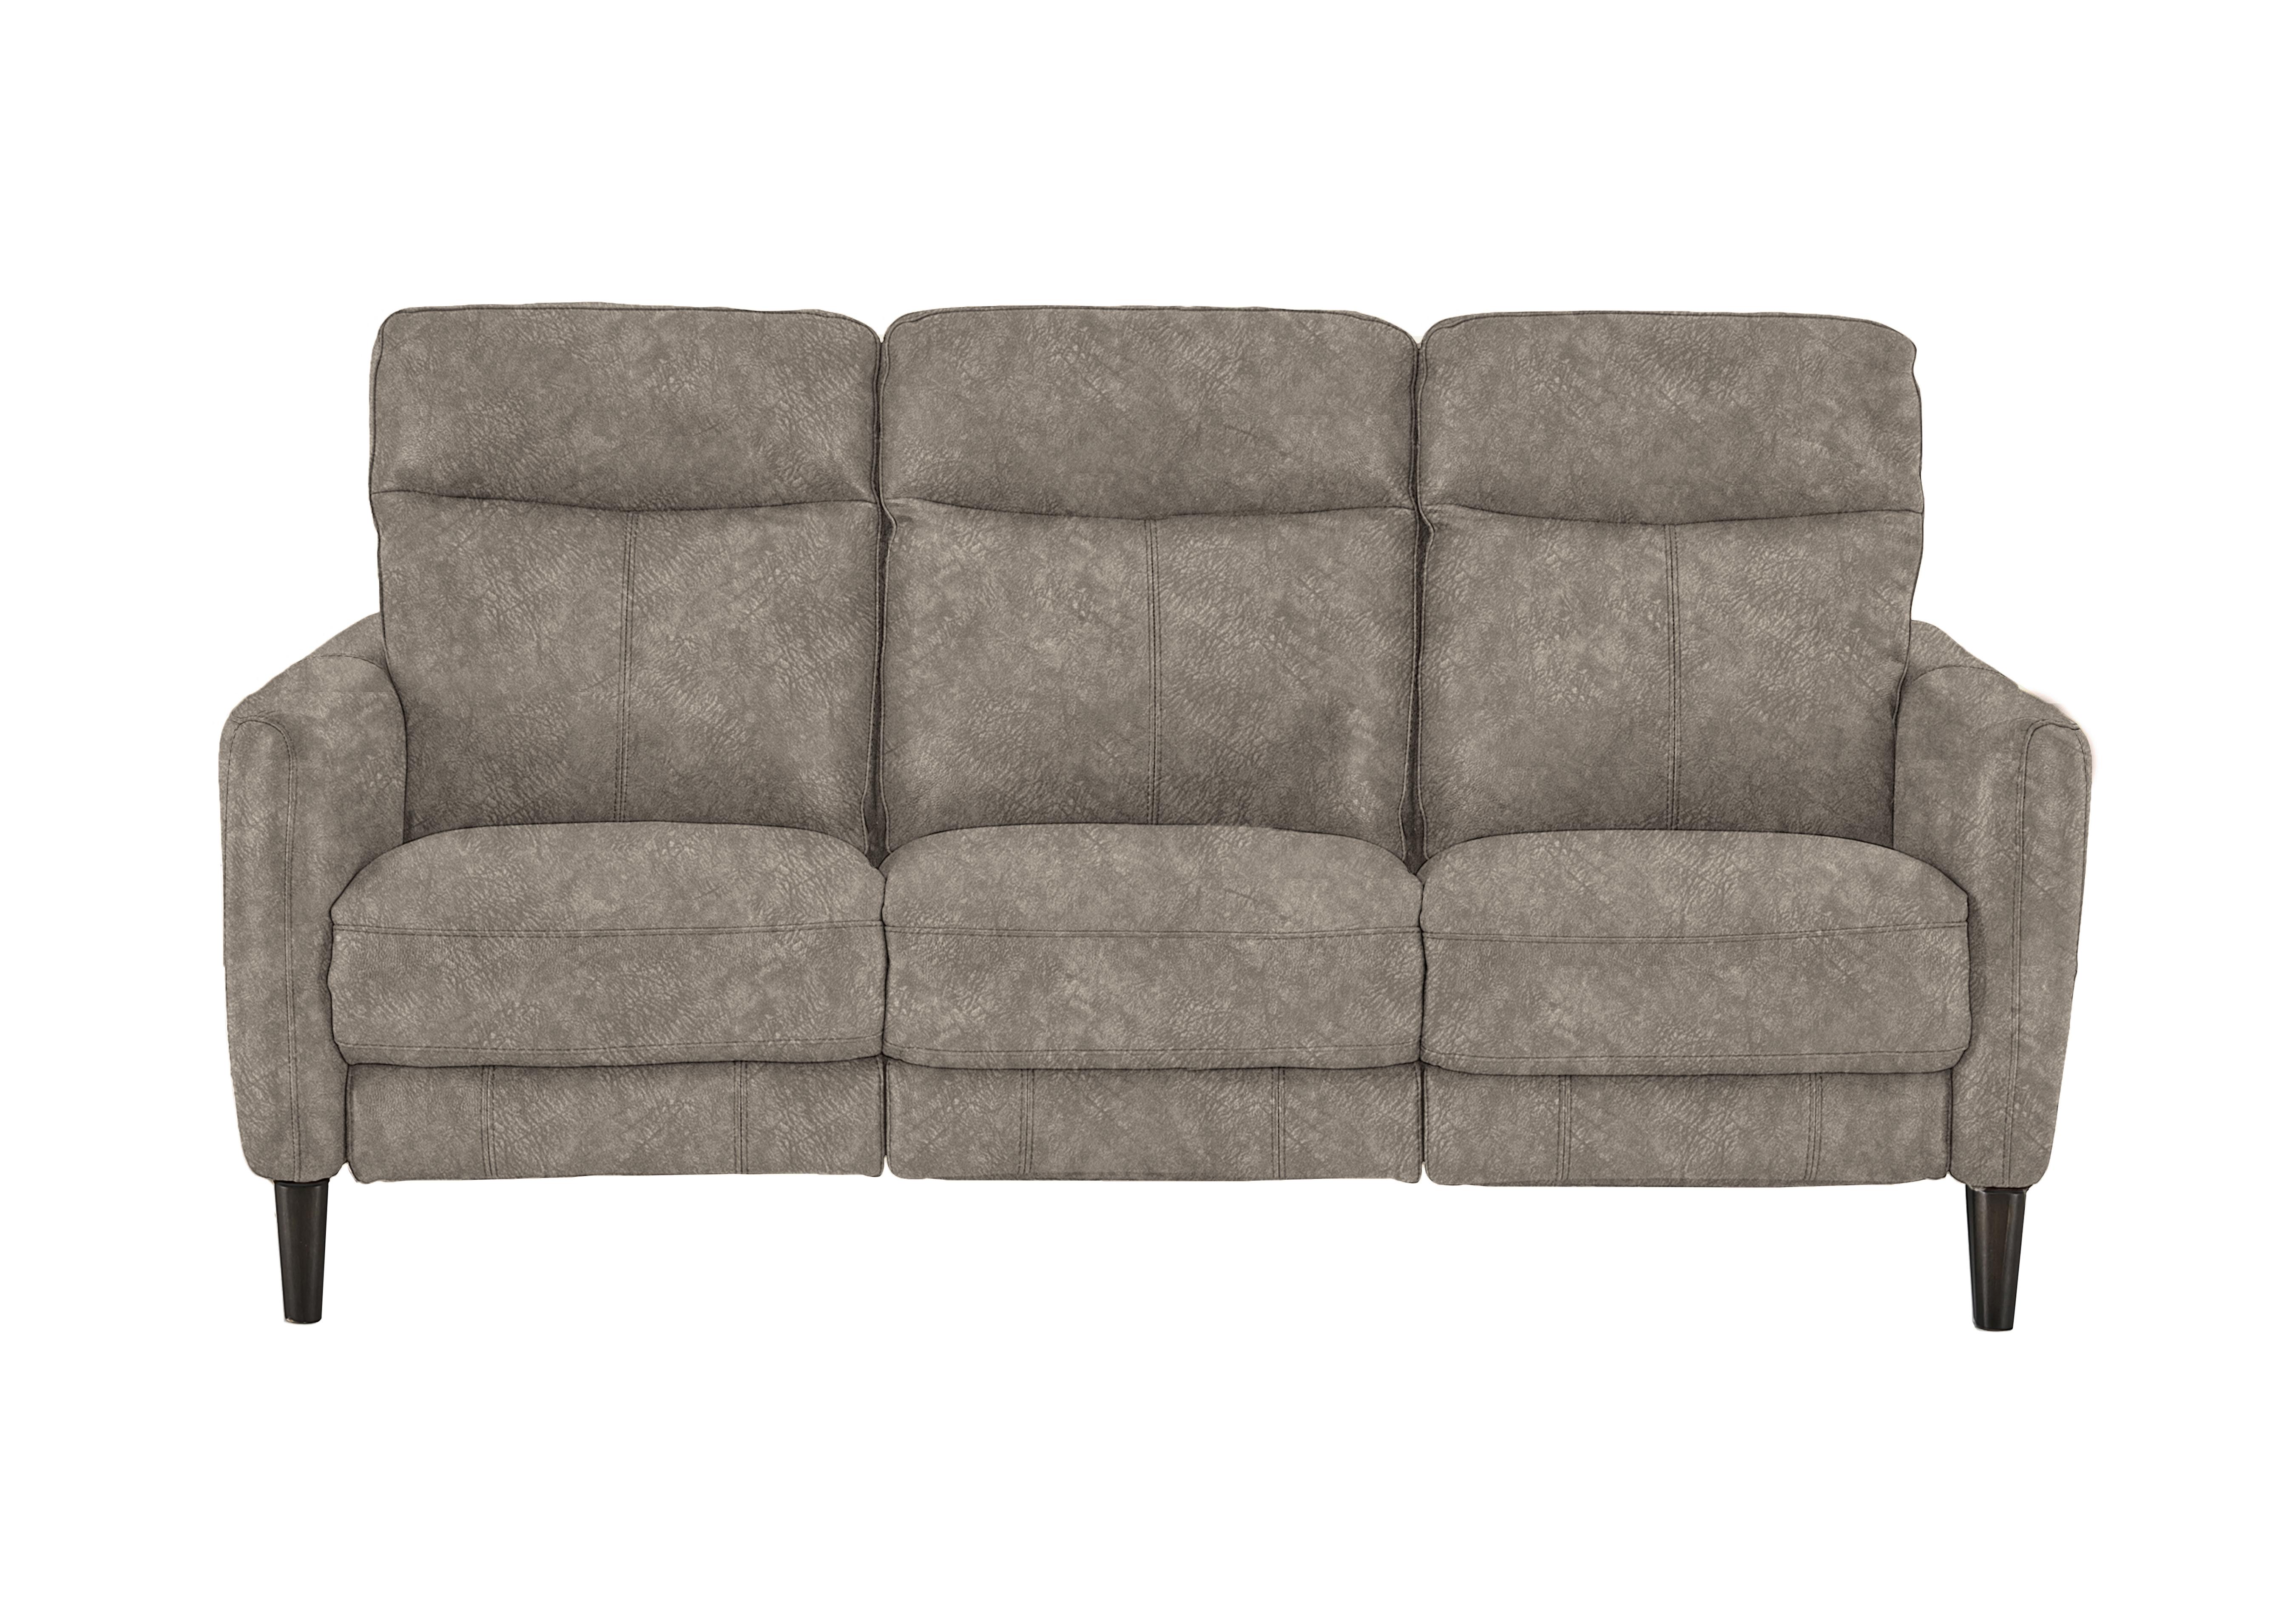 Compact Collection Petit 3 Seater Fabric Sofa in Bfa-Bnn-R29 Fv1 Mink on Furniture Village